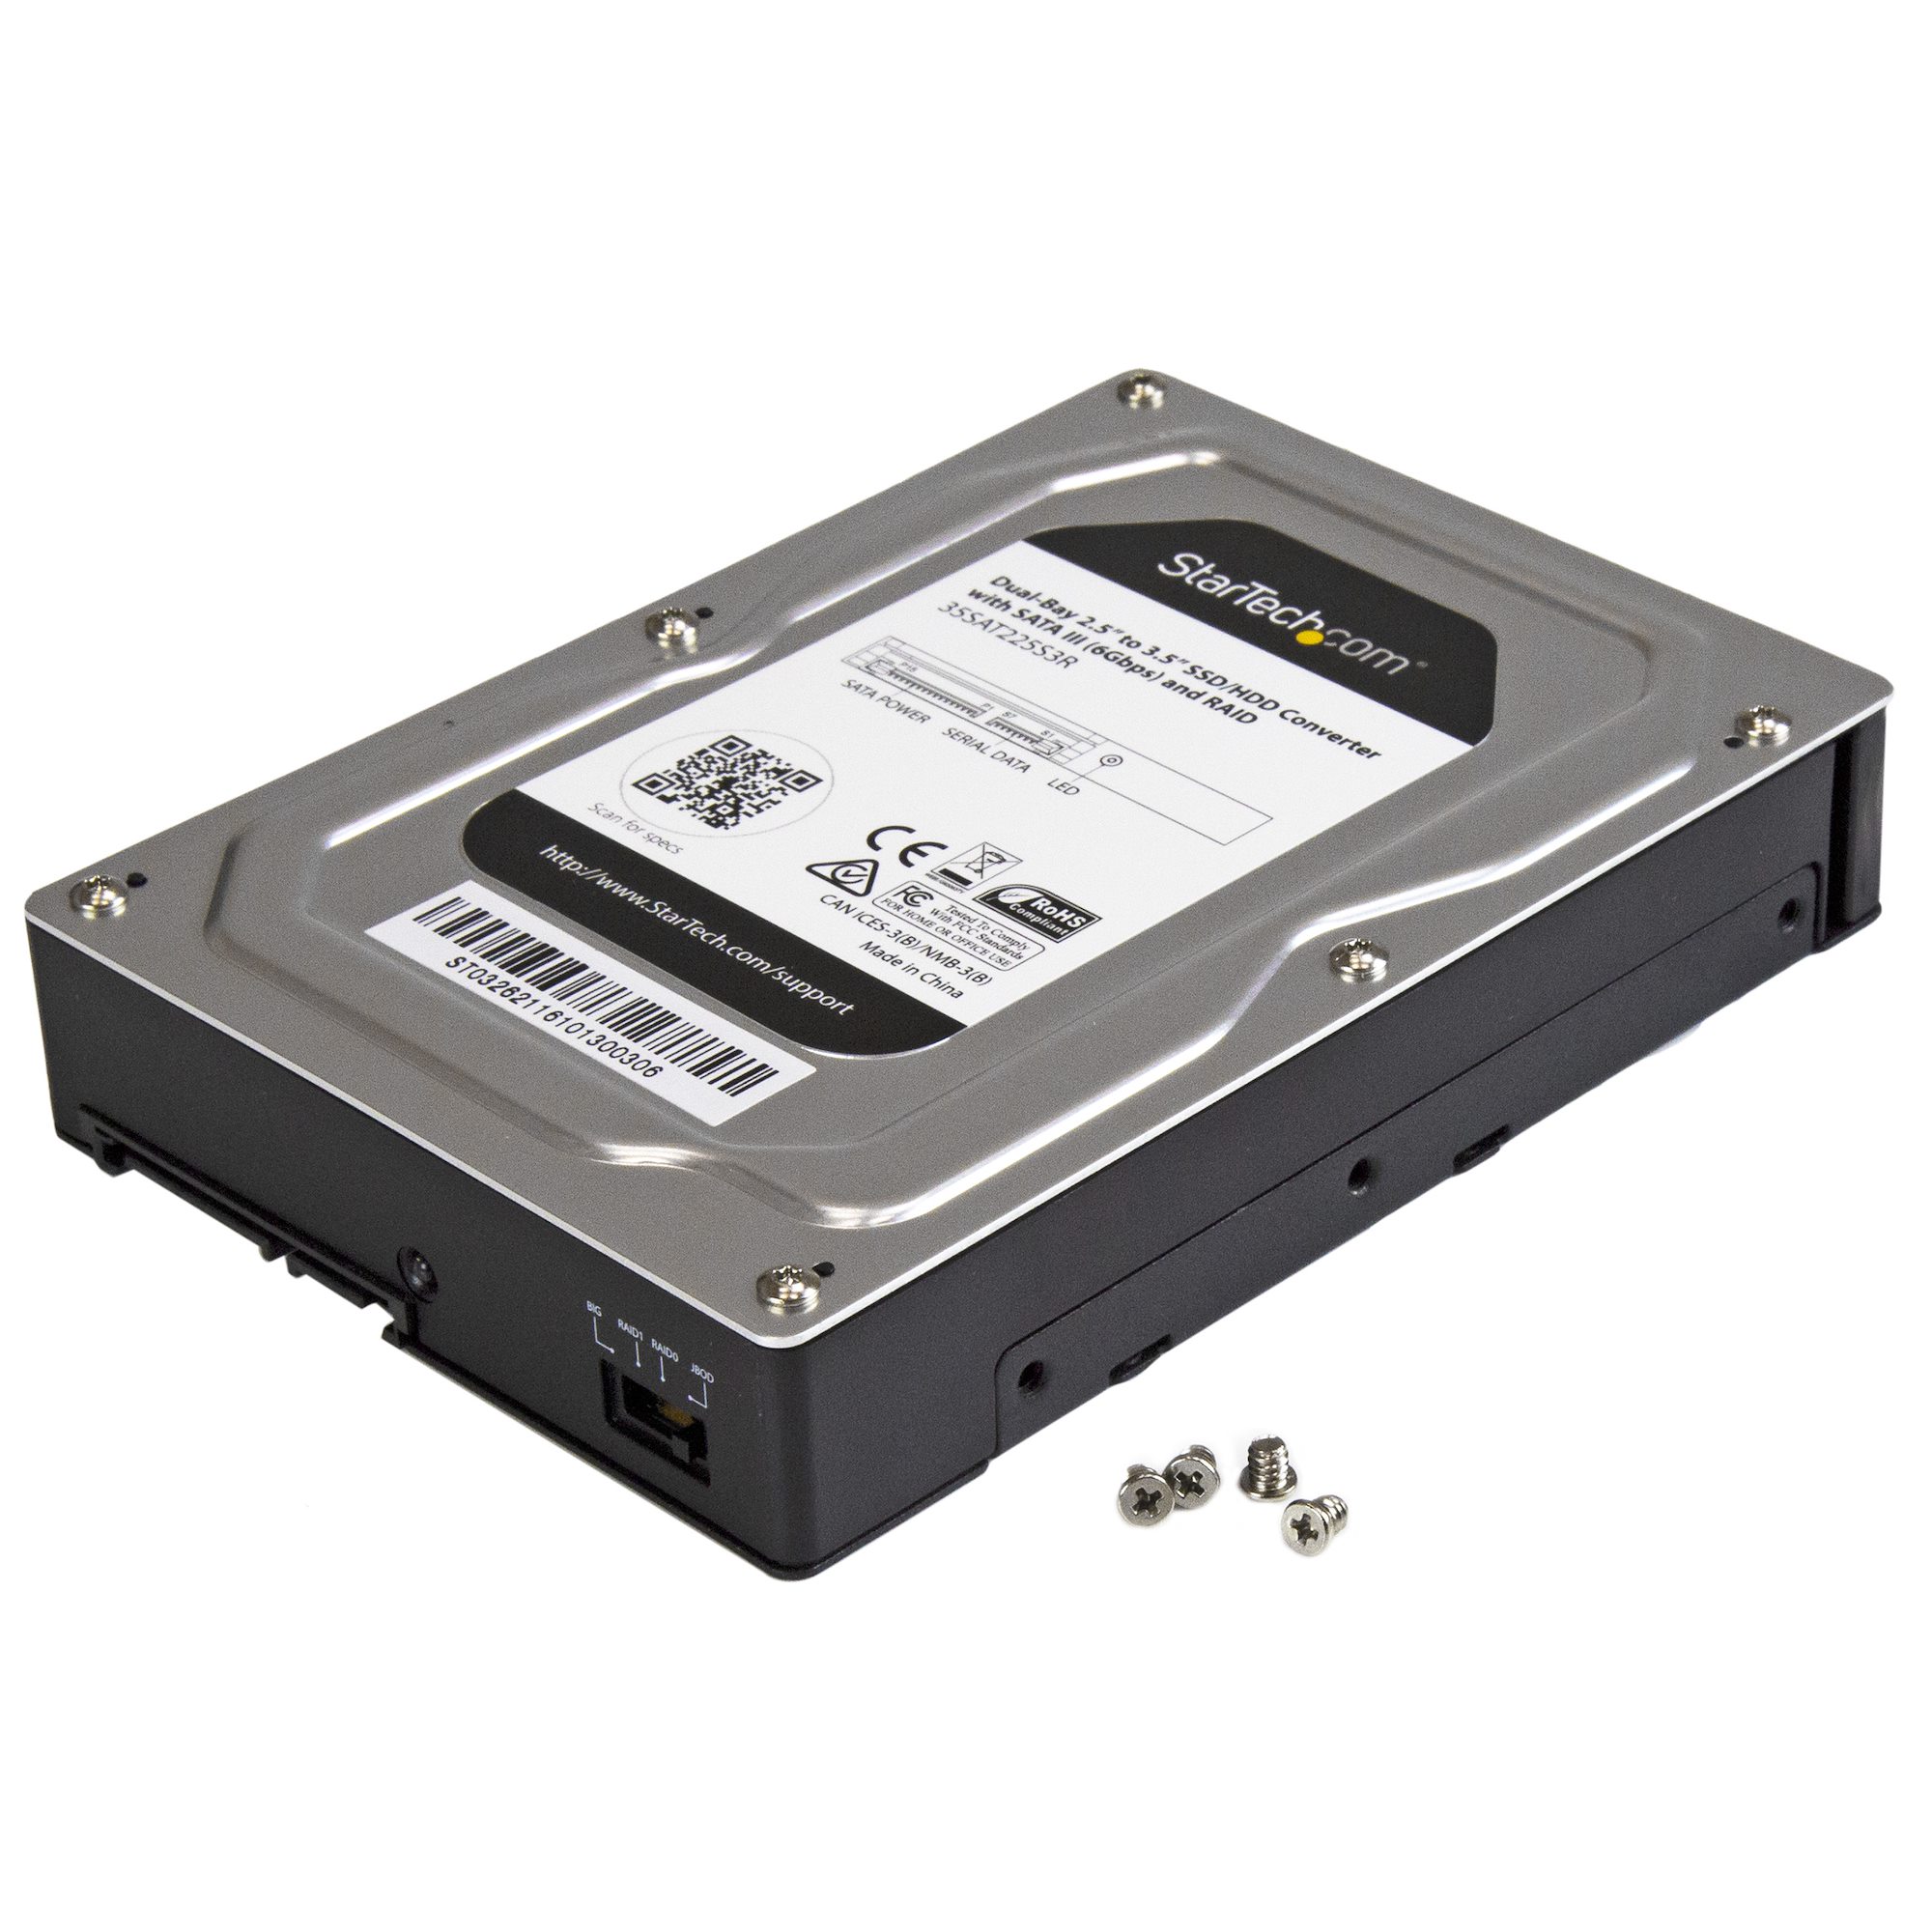 Universal 5.25 Open or 3.5 HDD to 3.5 HDD or 2.5 Multiple HDD Bracket  HDD-25-35